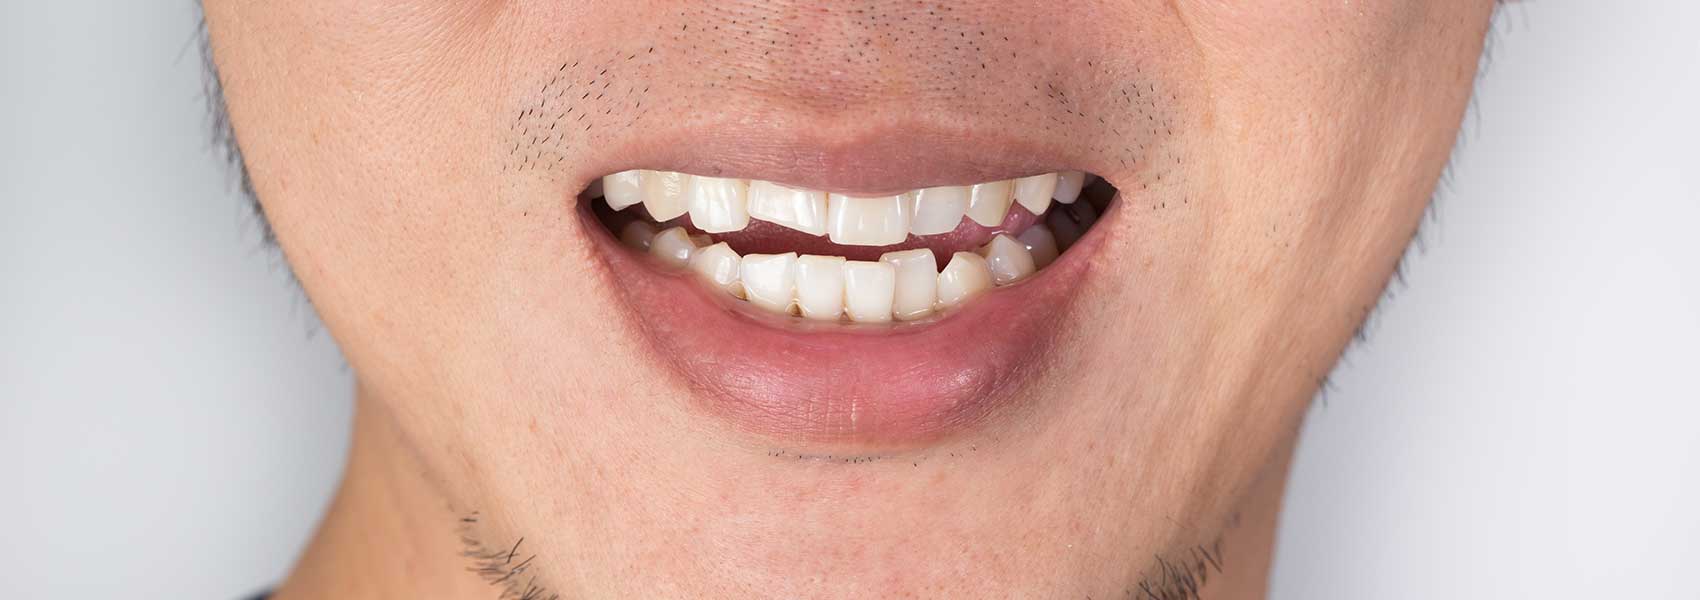 Man smiling with his cracked tooth